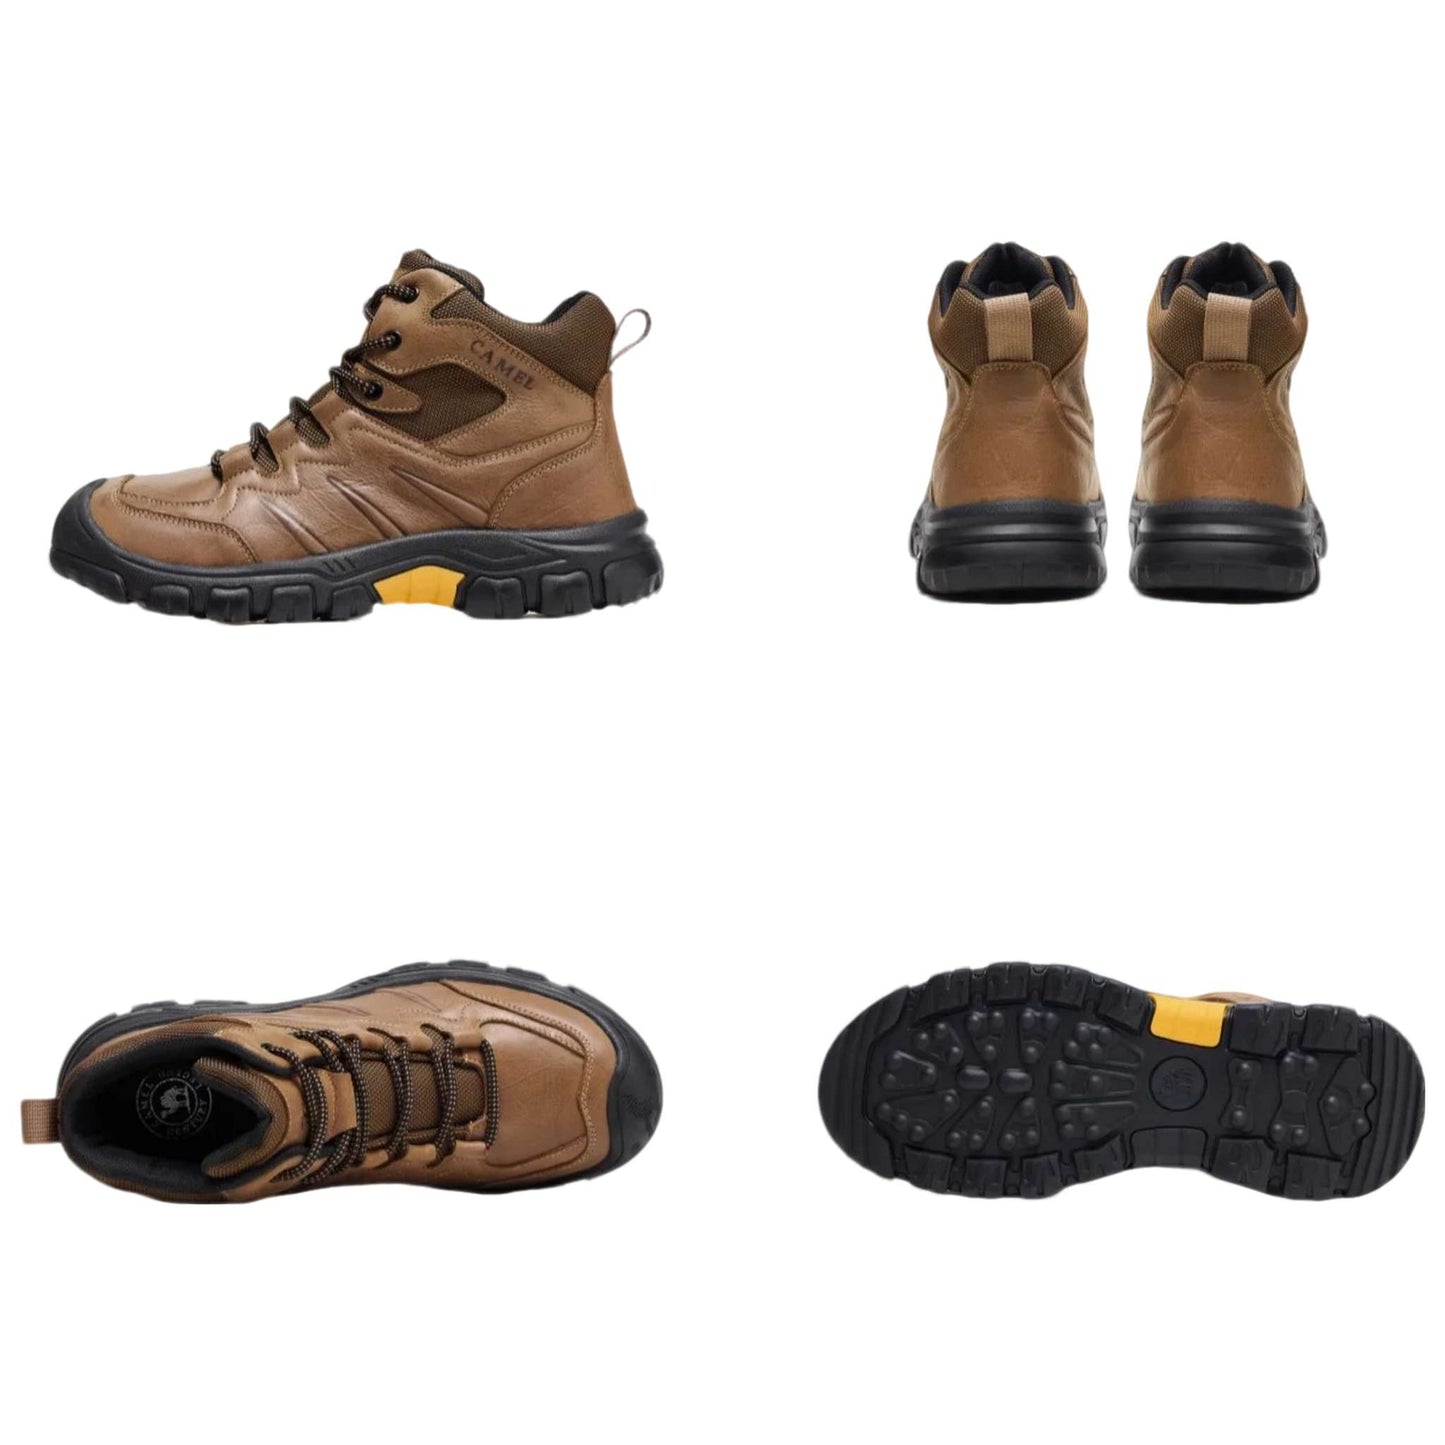 High-Top Men's Leather Hiking Boots - Durable Outdoor Trekking Shoes with Non-Slip Sole